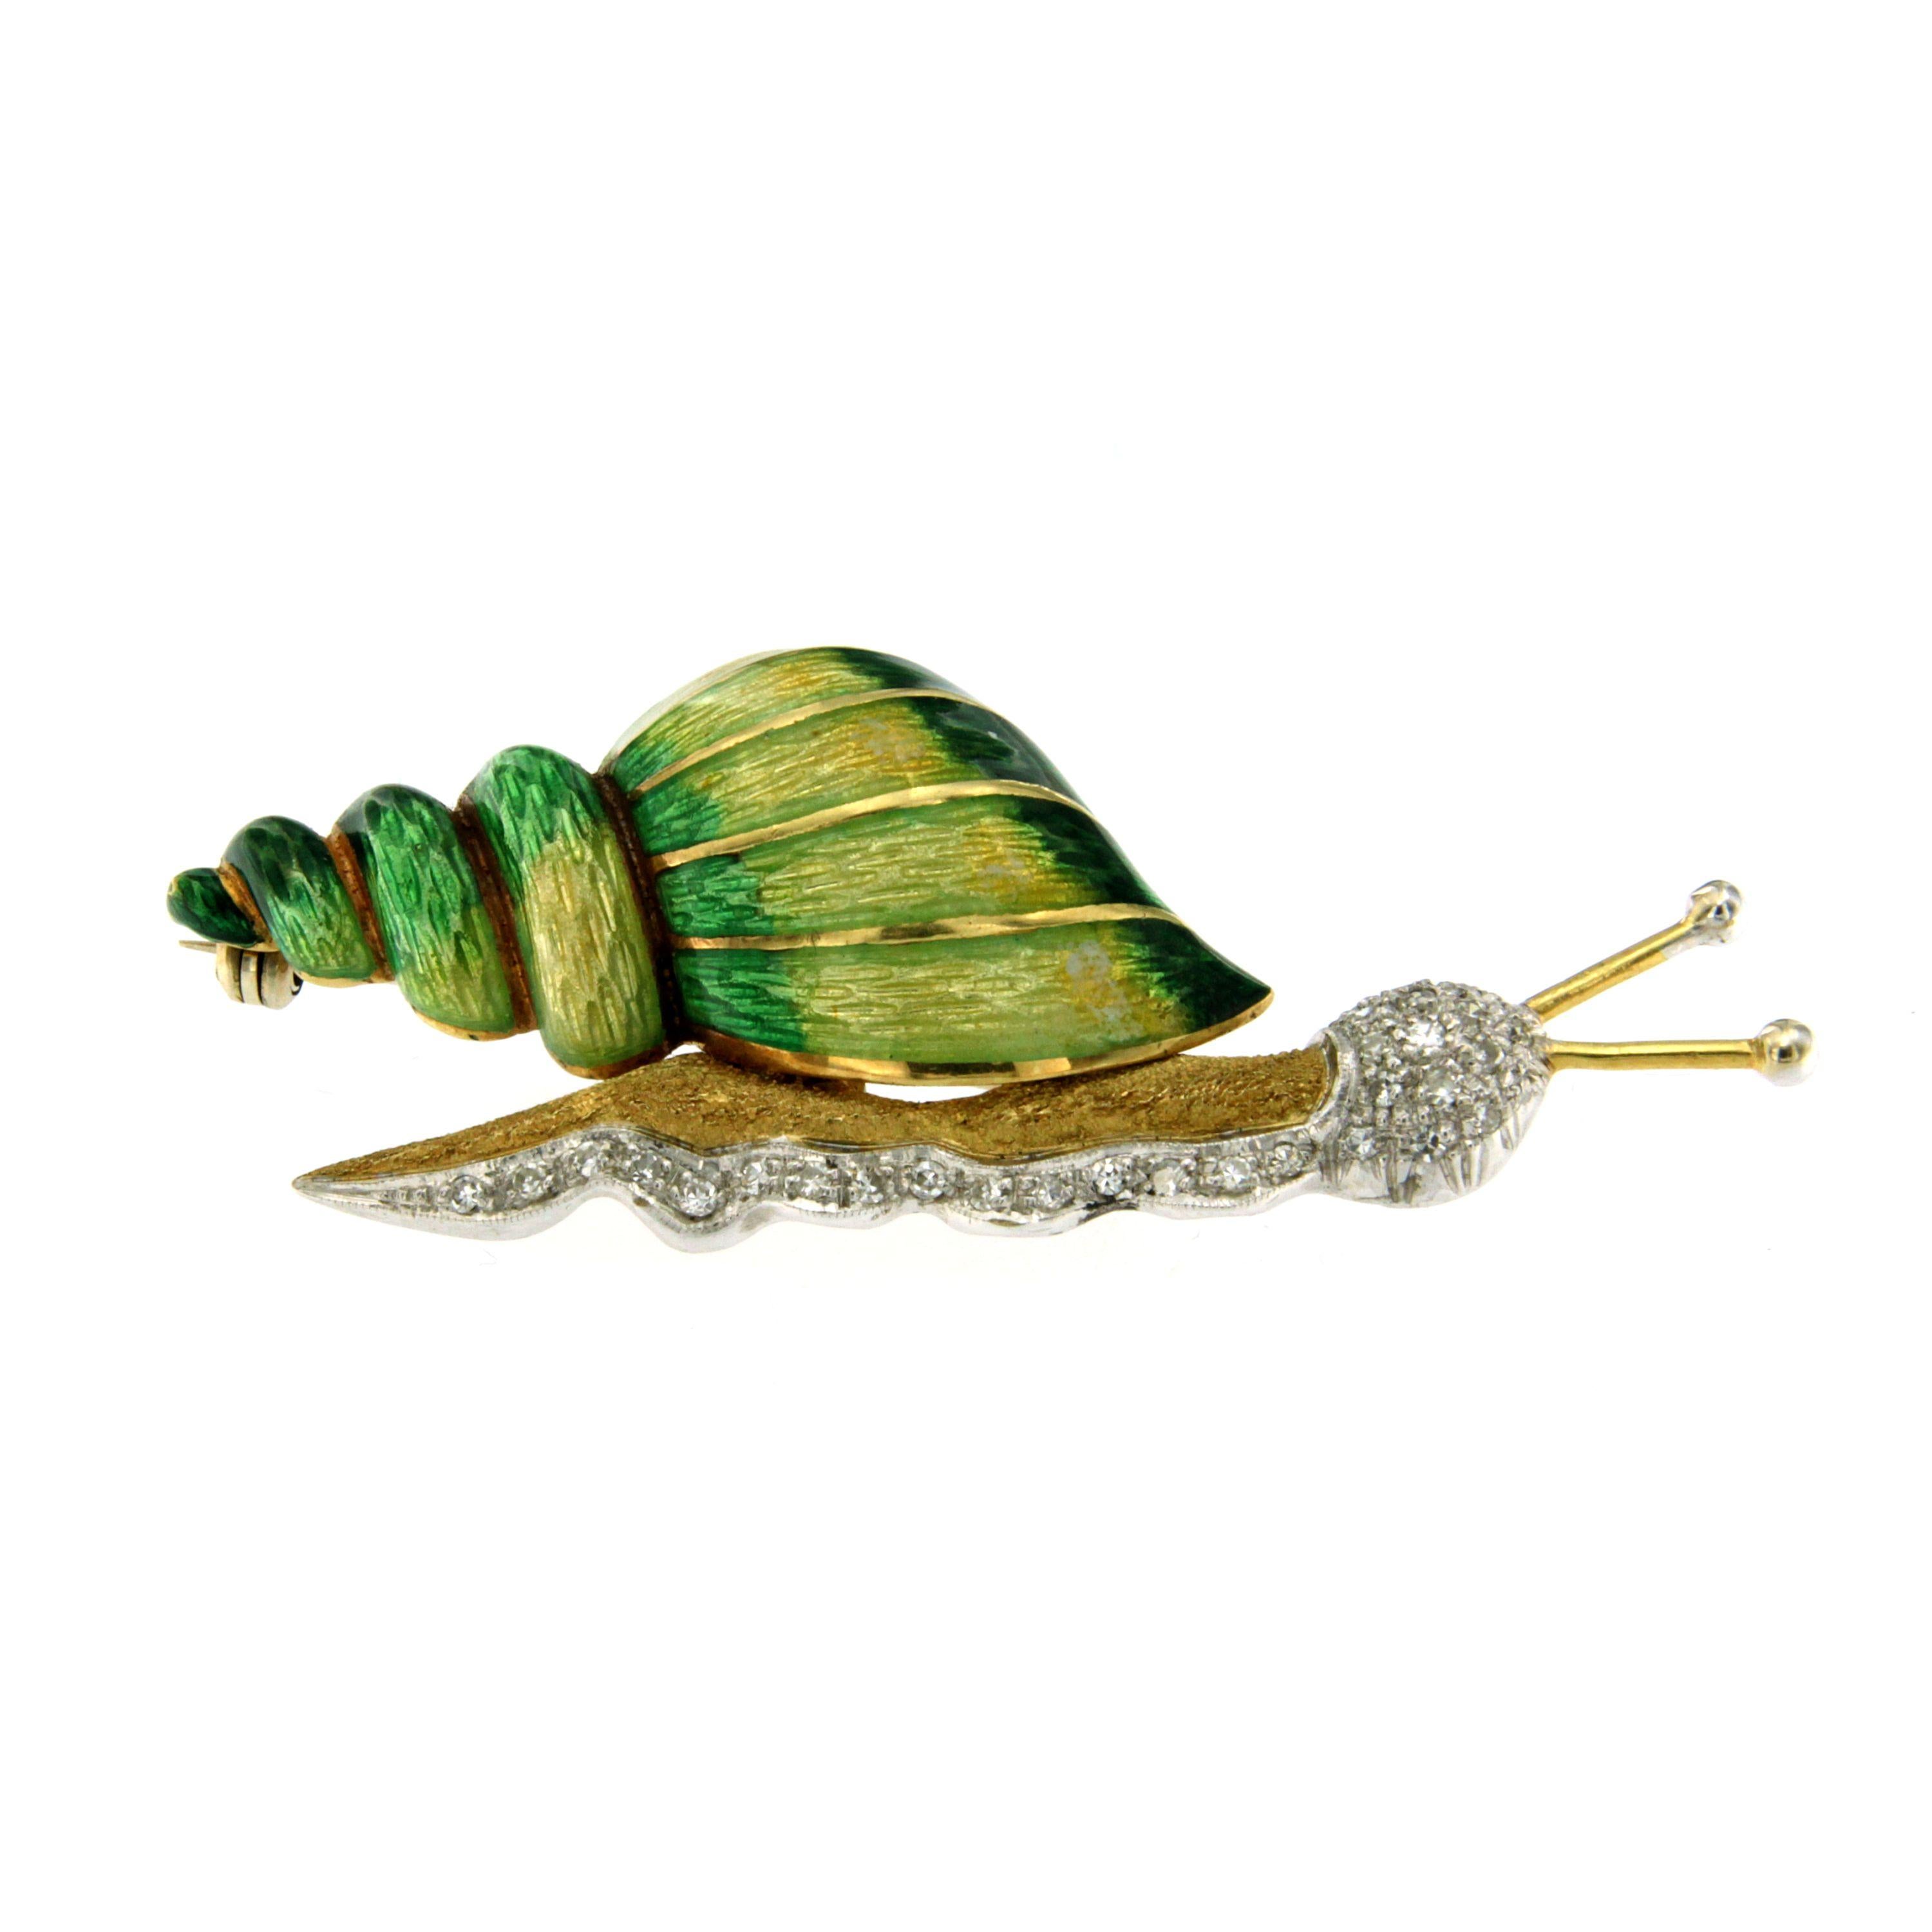 Unusual Snail shaped brooch hand made in Italy of 18k yellow and white gold. Shades of green enamel on the shell, and body in gold and colorless diamonds pave setting.
Marked and signed, Circa 1960

CONDITION: Pre-owned - Excellent
METAL: 18k Gold